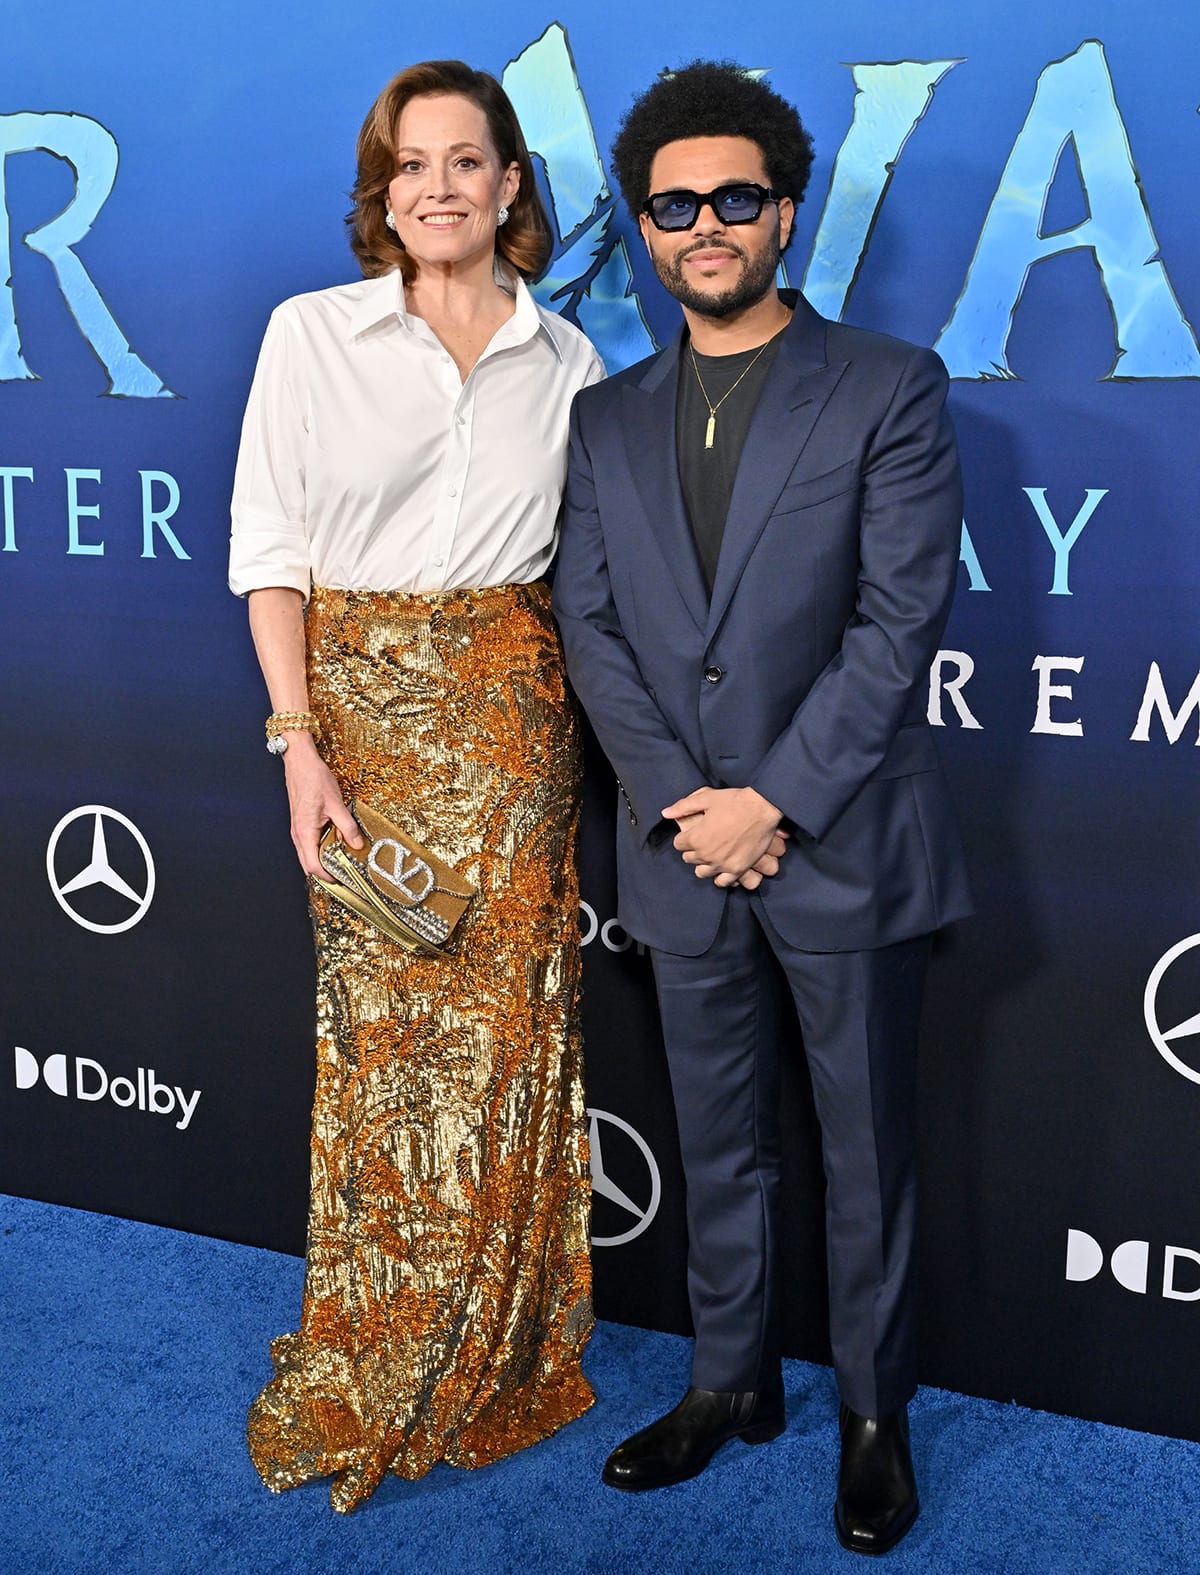 Sigourney Weaver poses with The Weeknd, who looks dapper in a navy suit with a black tee underneath